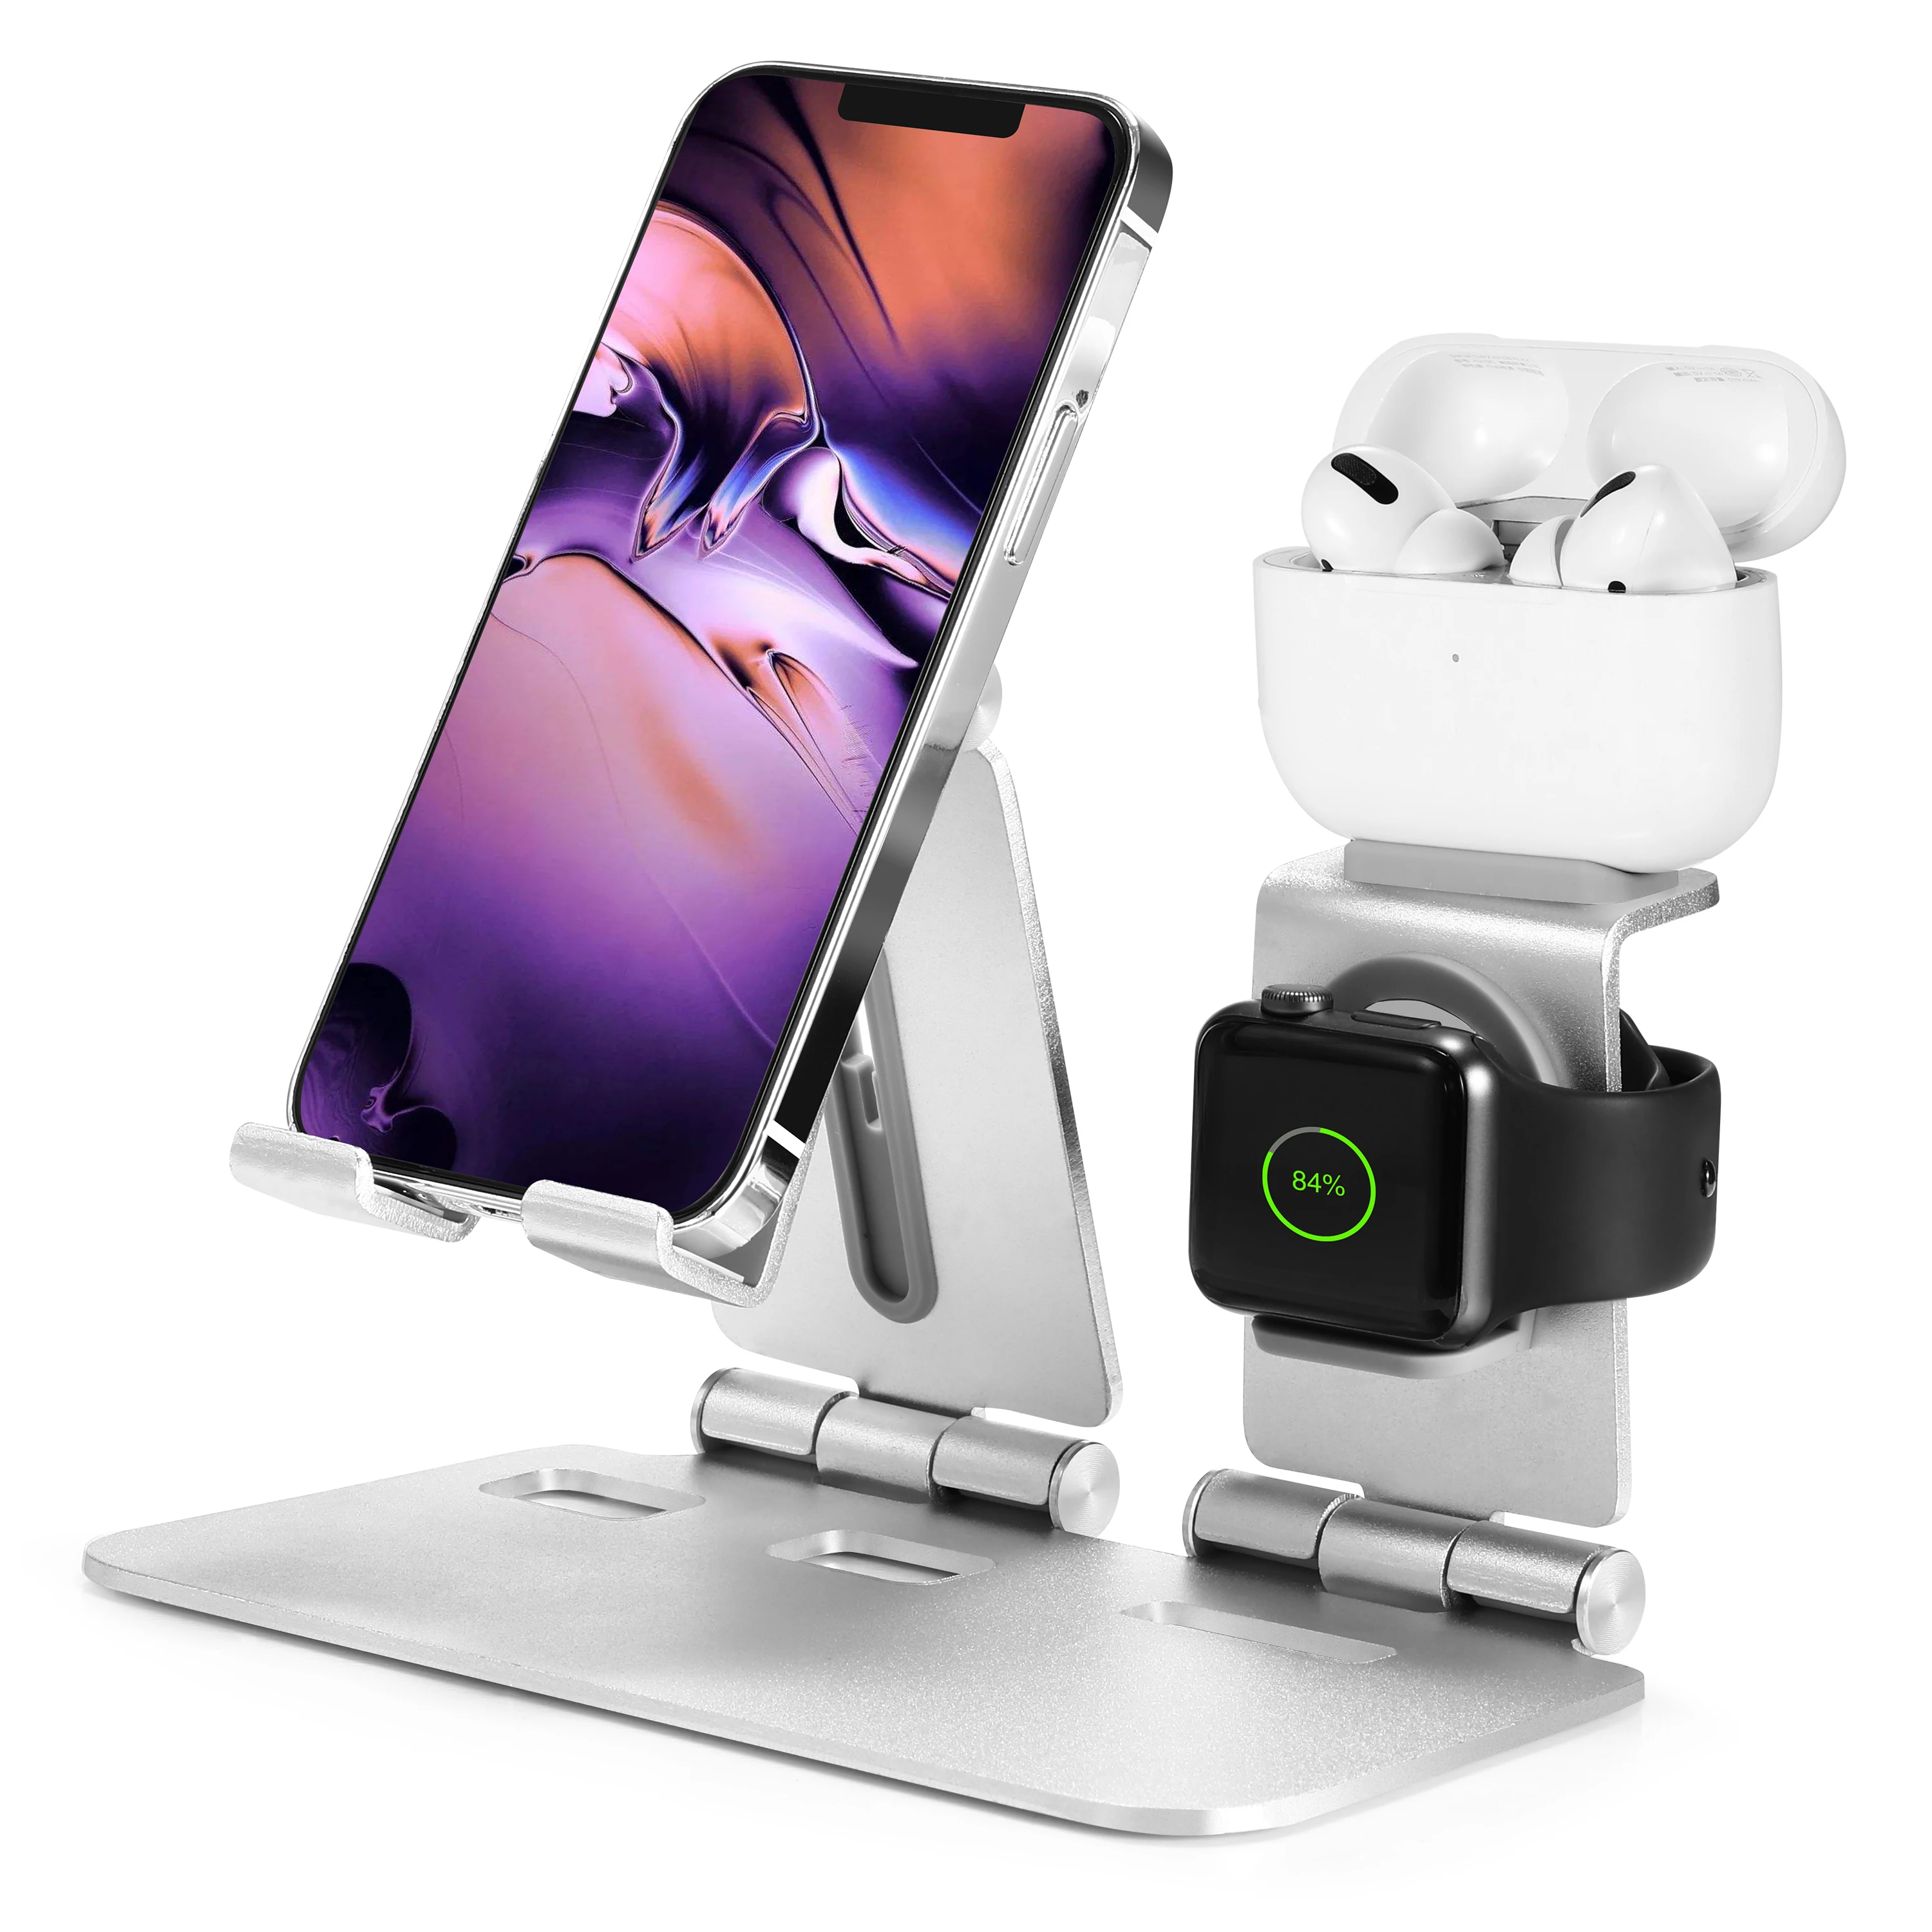 3 in 1 Alloy Desktop Phone Charge Dock Holder For AirPods 1/2 Pro Apple iWatch For All iPhone iPad Android Tablet Charging Stand